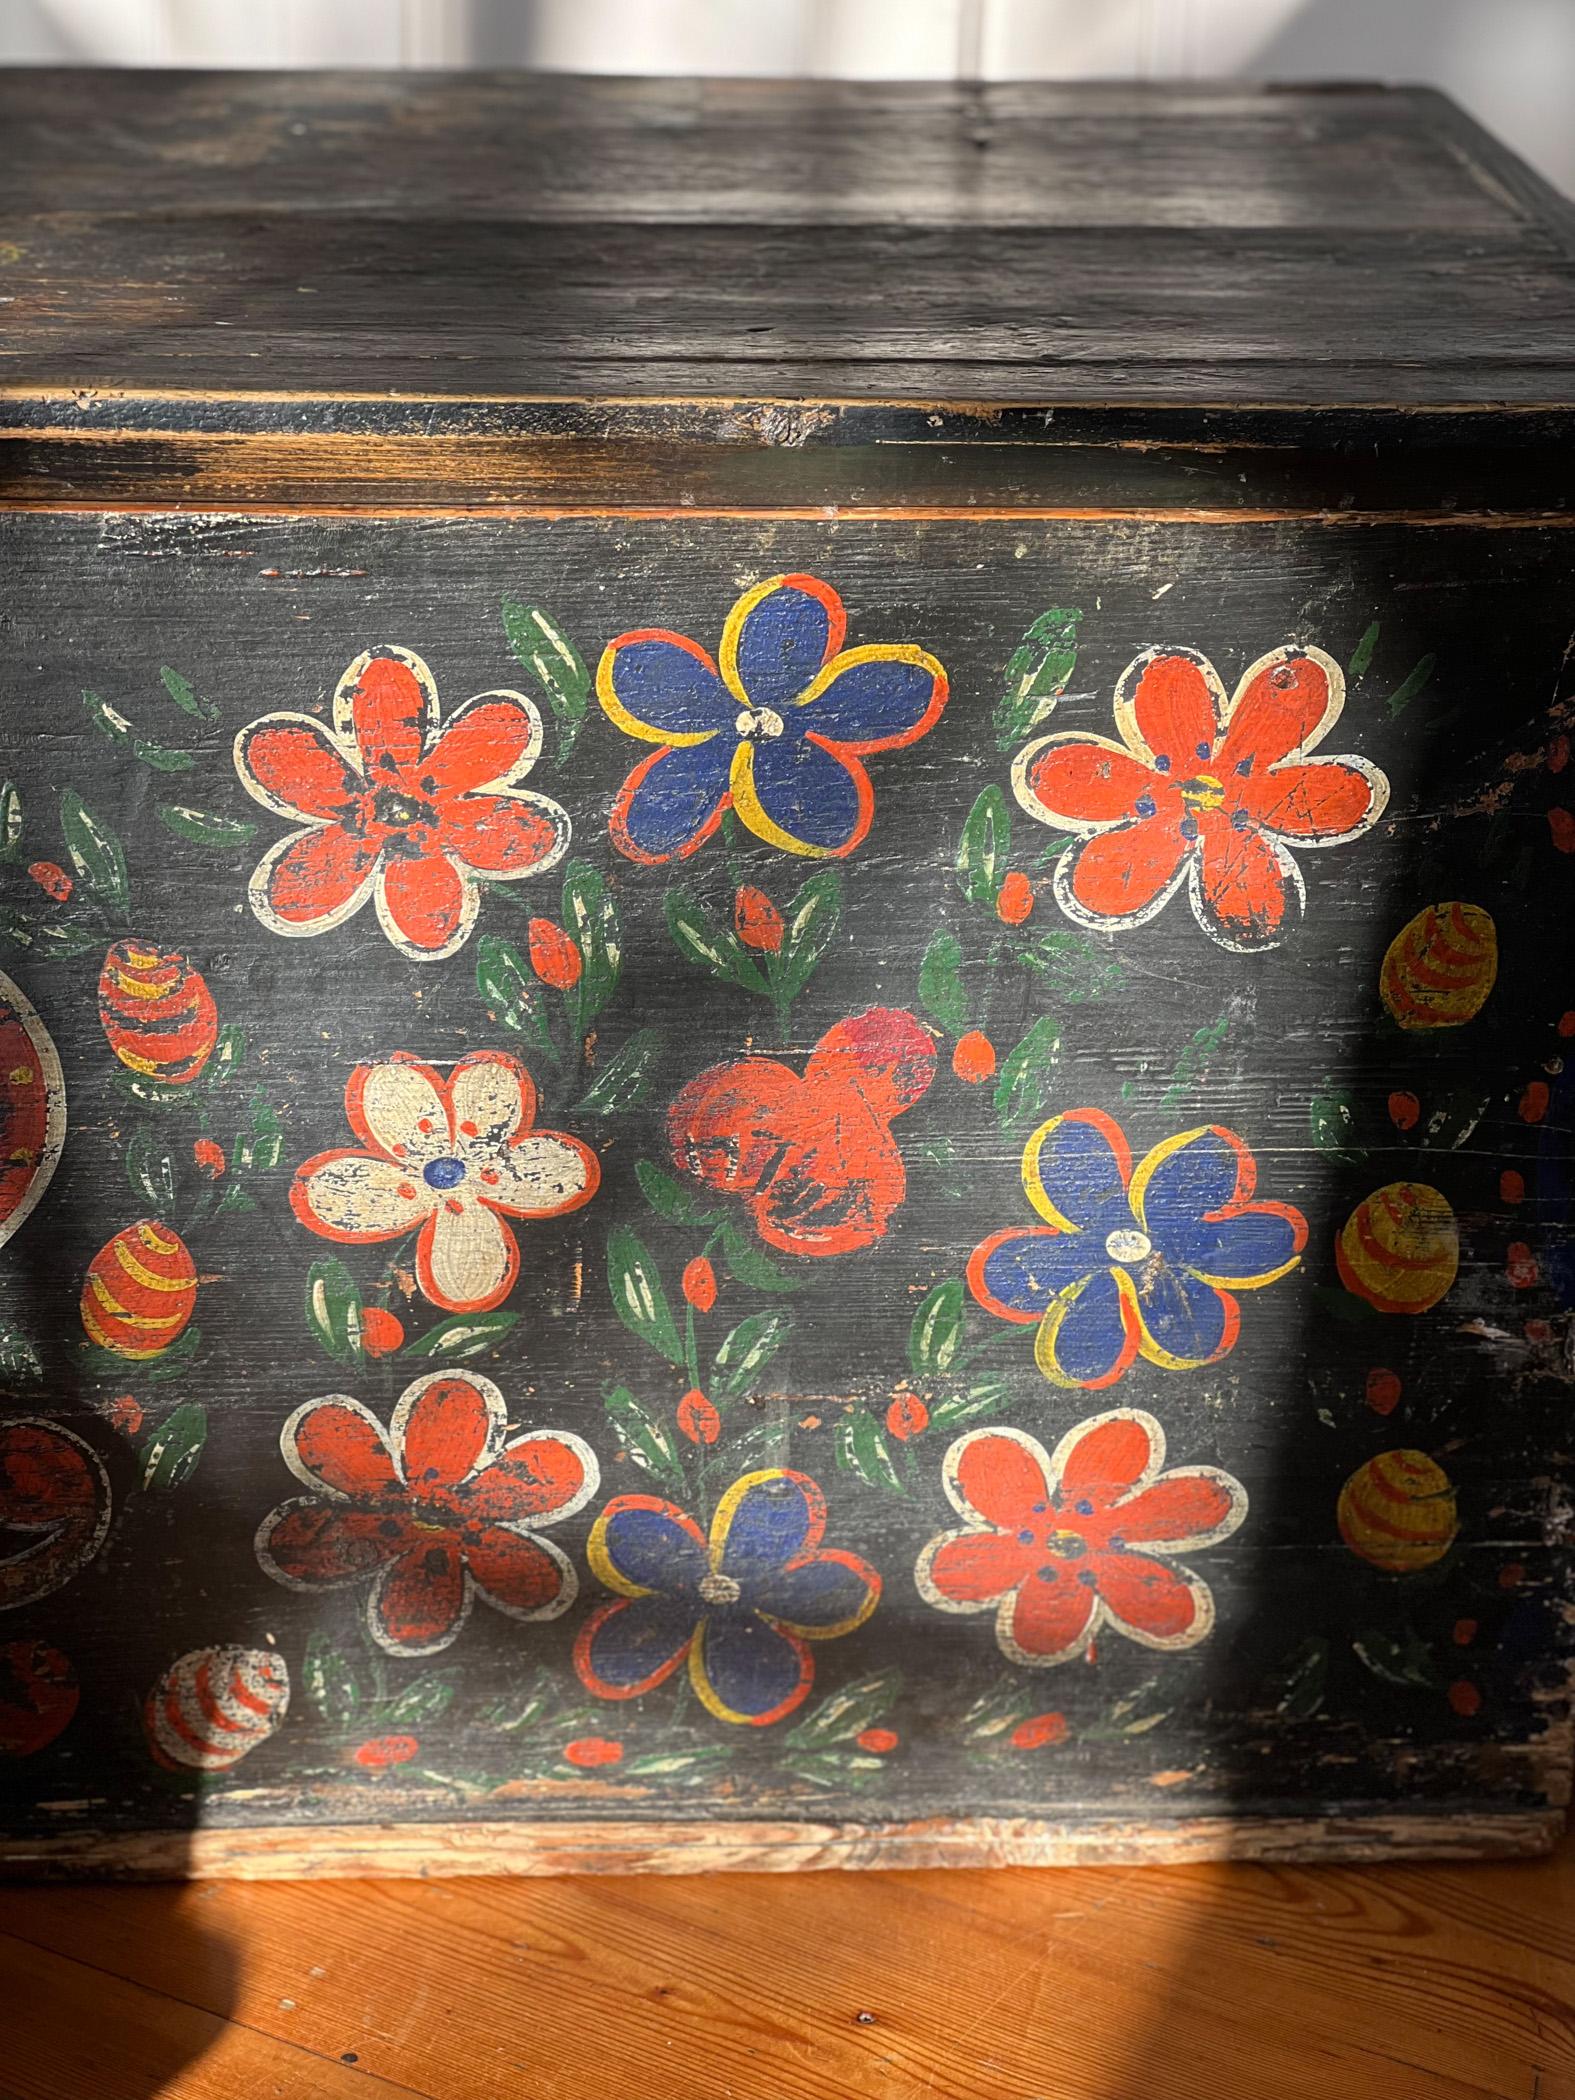 Late 19 C Hand Painted Large Wooden Chest / Trunk from Brittany, France 7